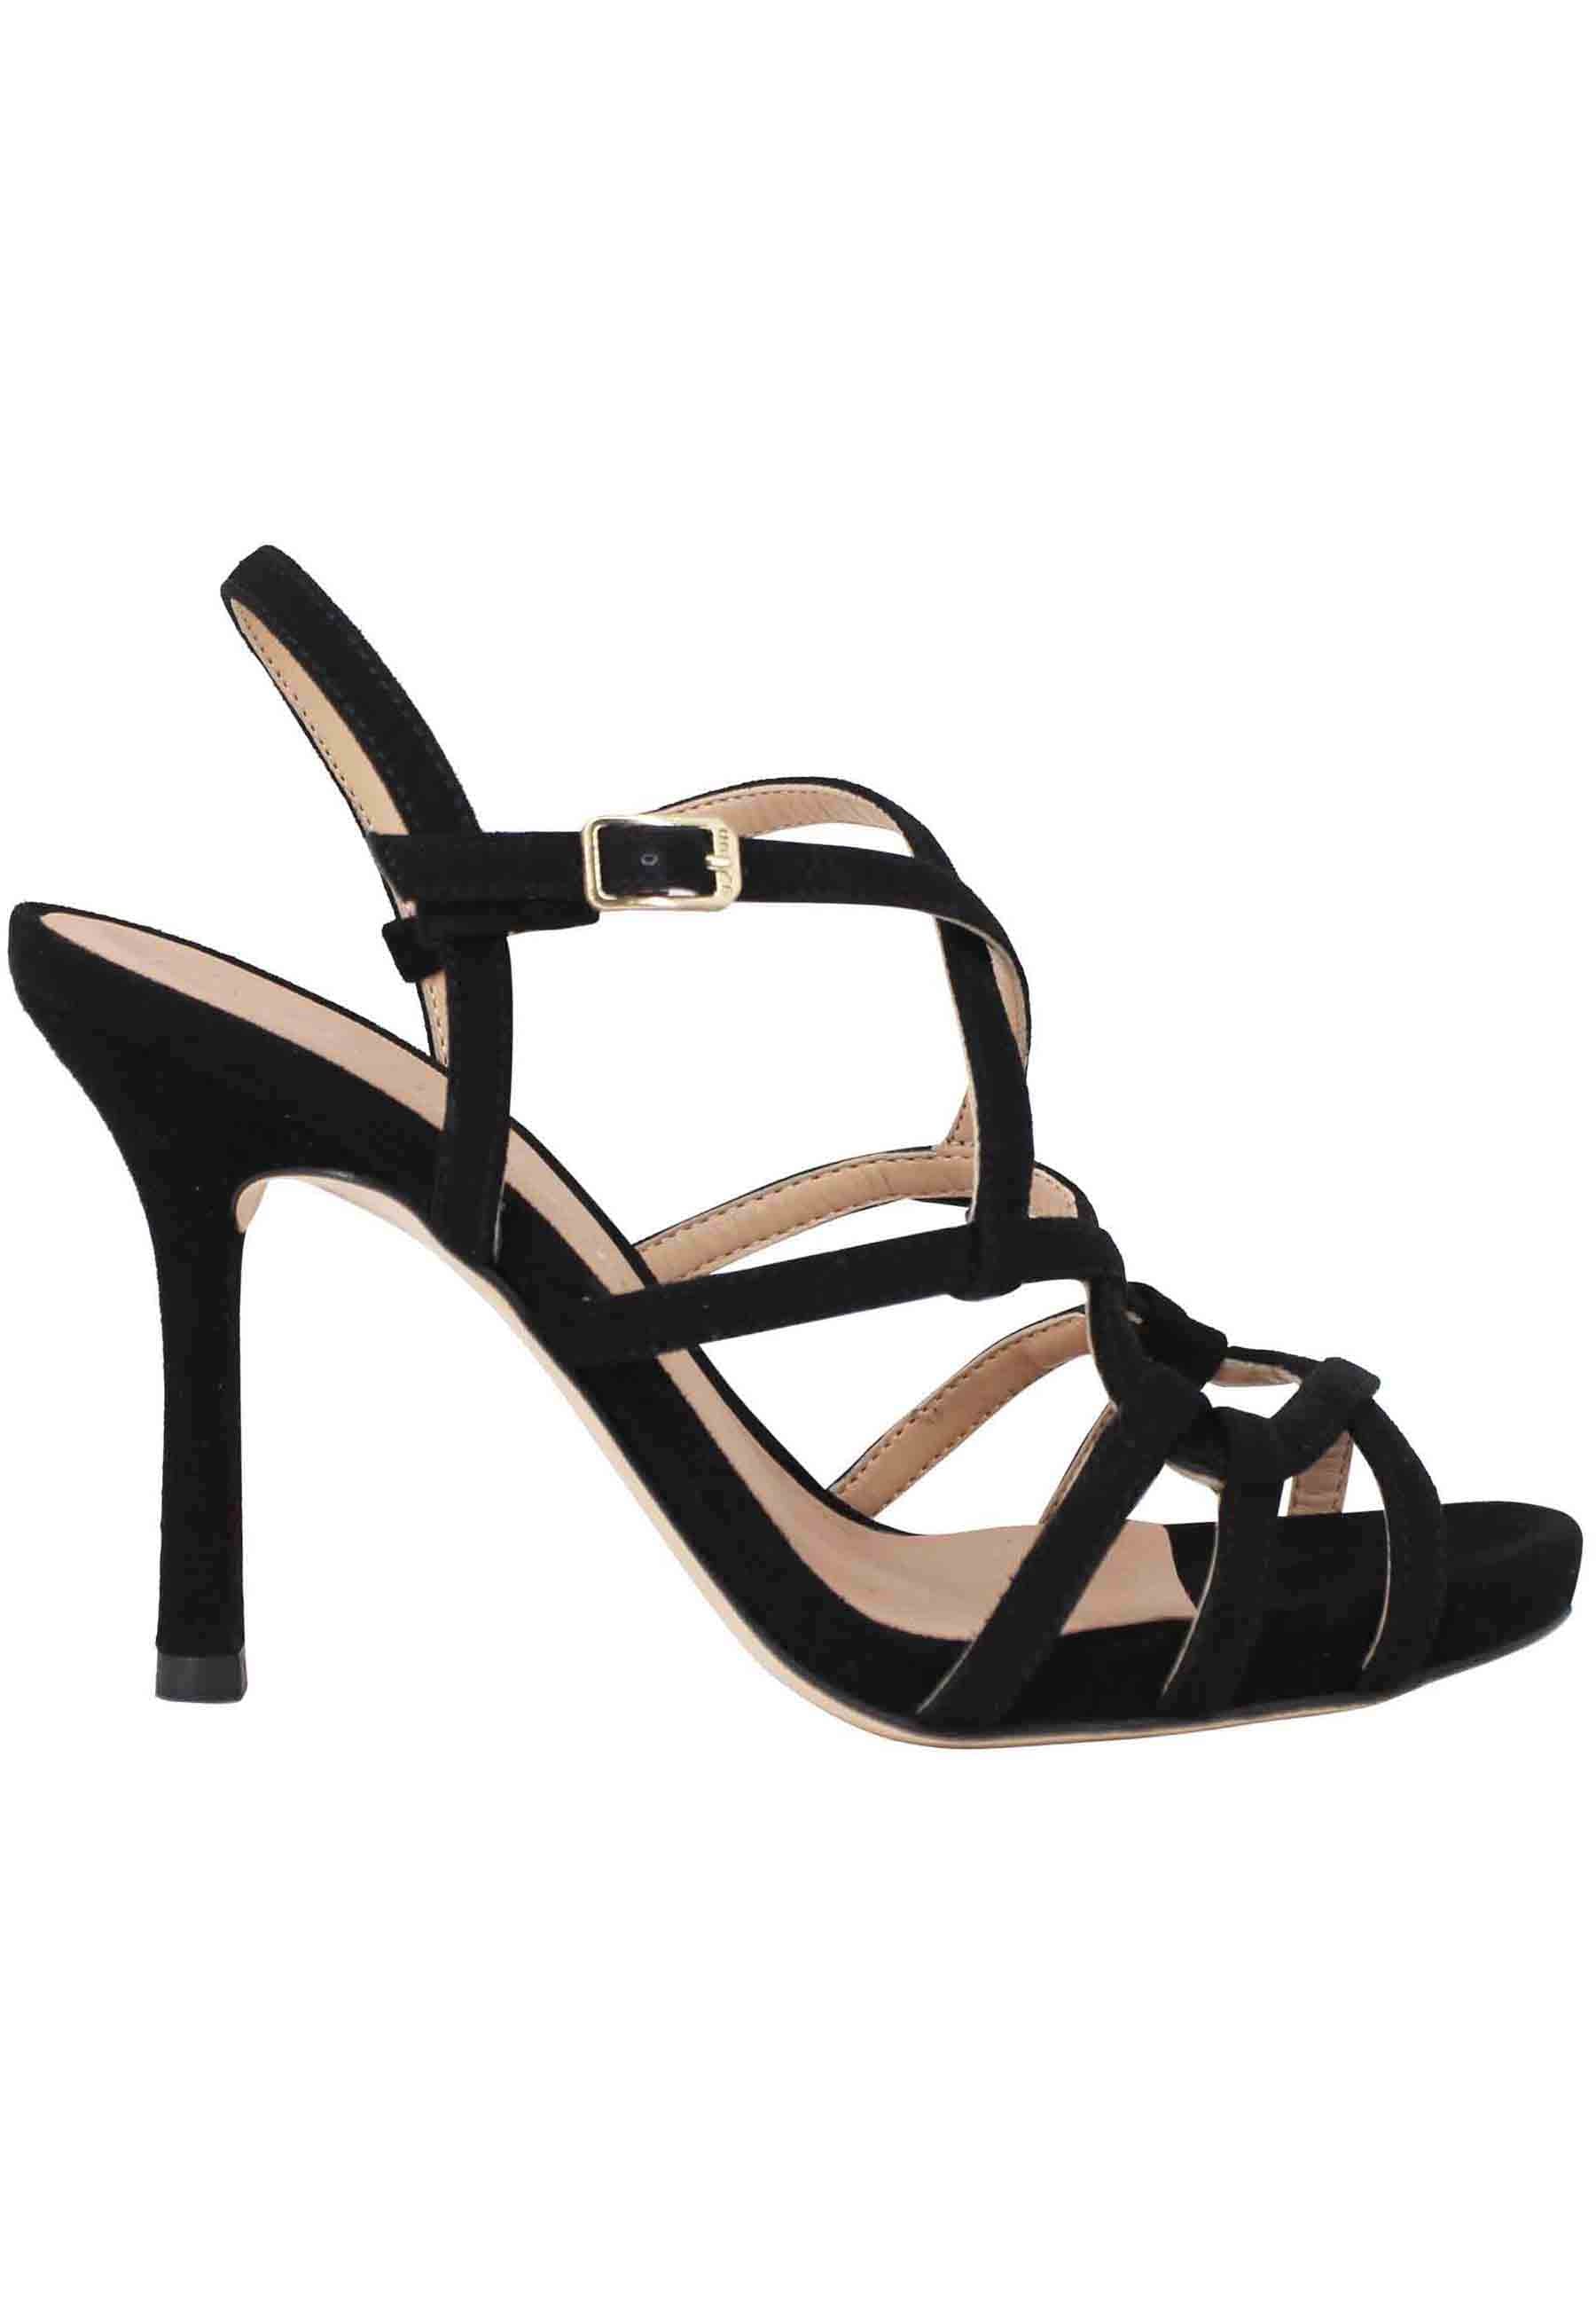 Women's sandals in black suede with high heel and ankle strap